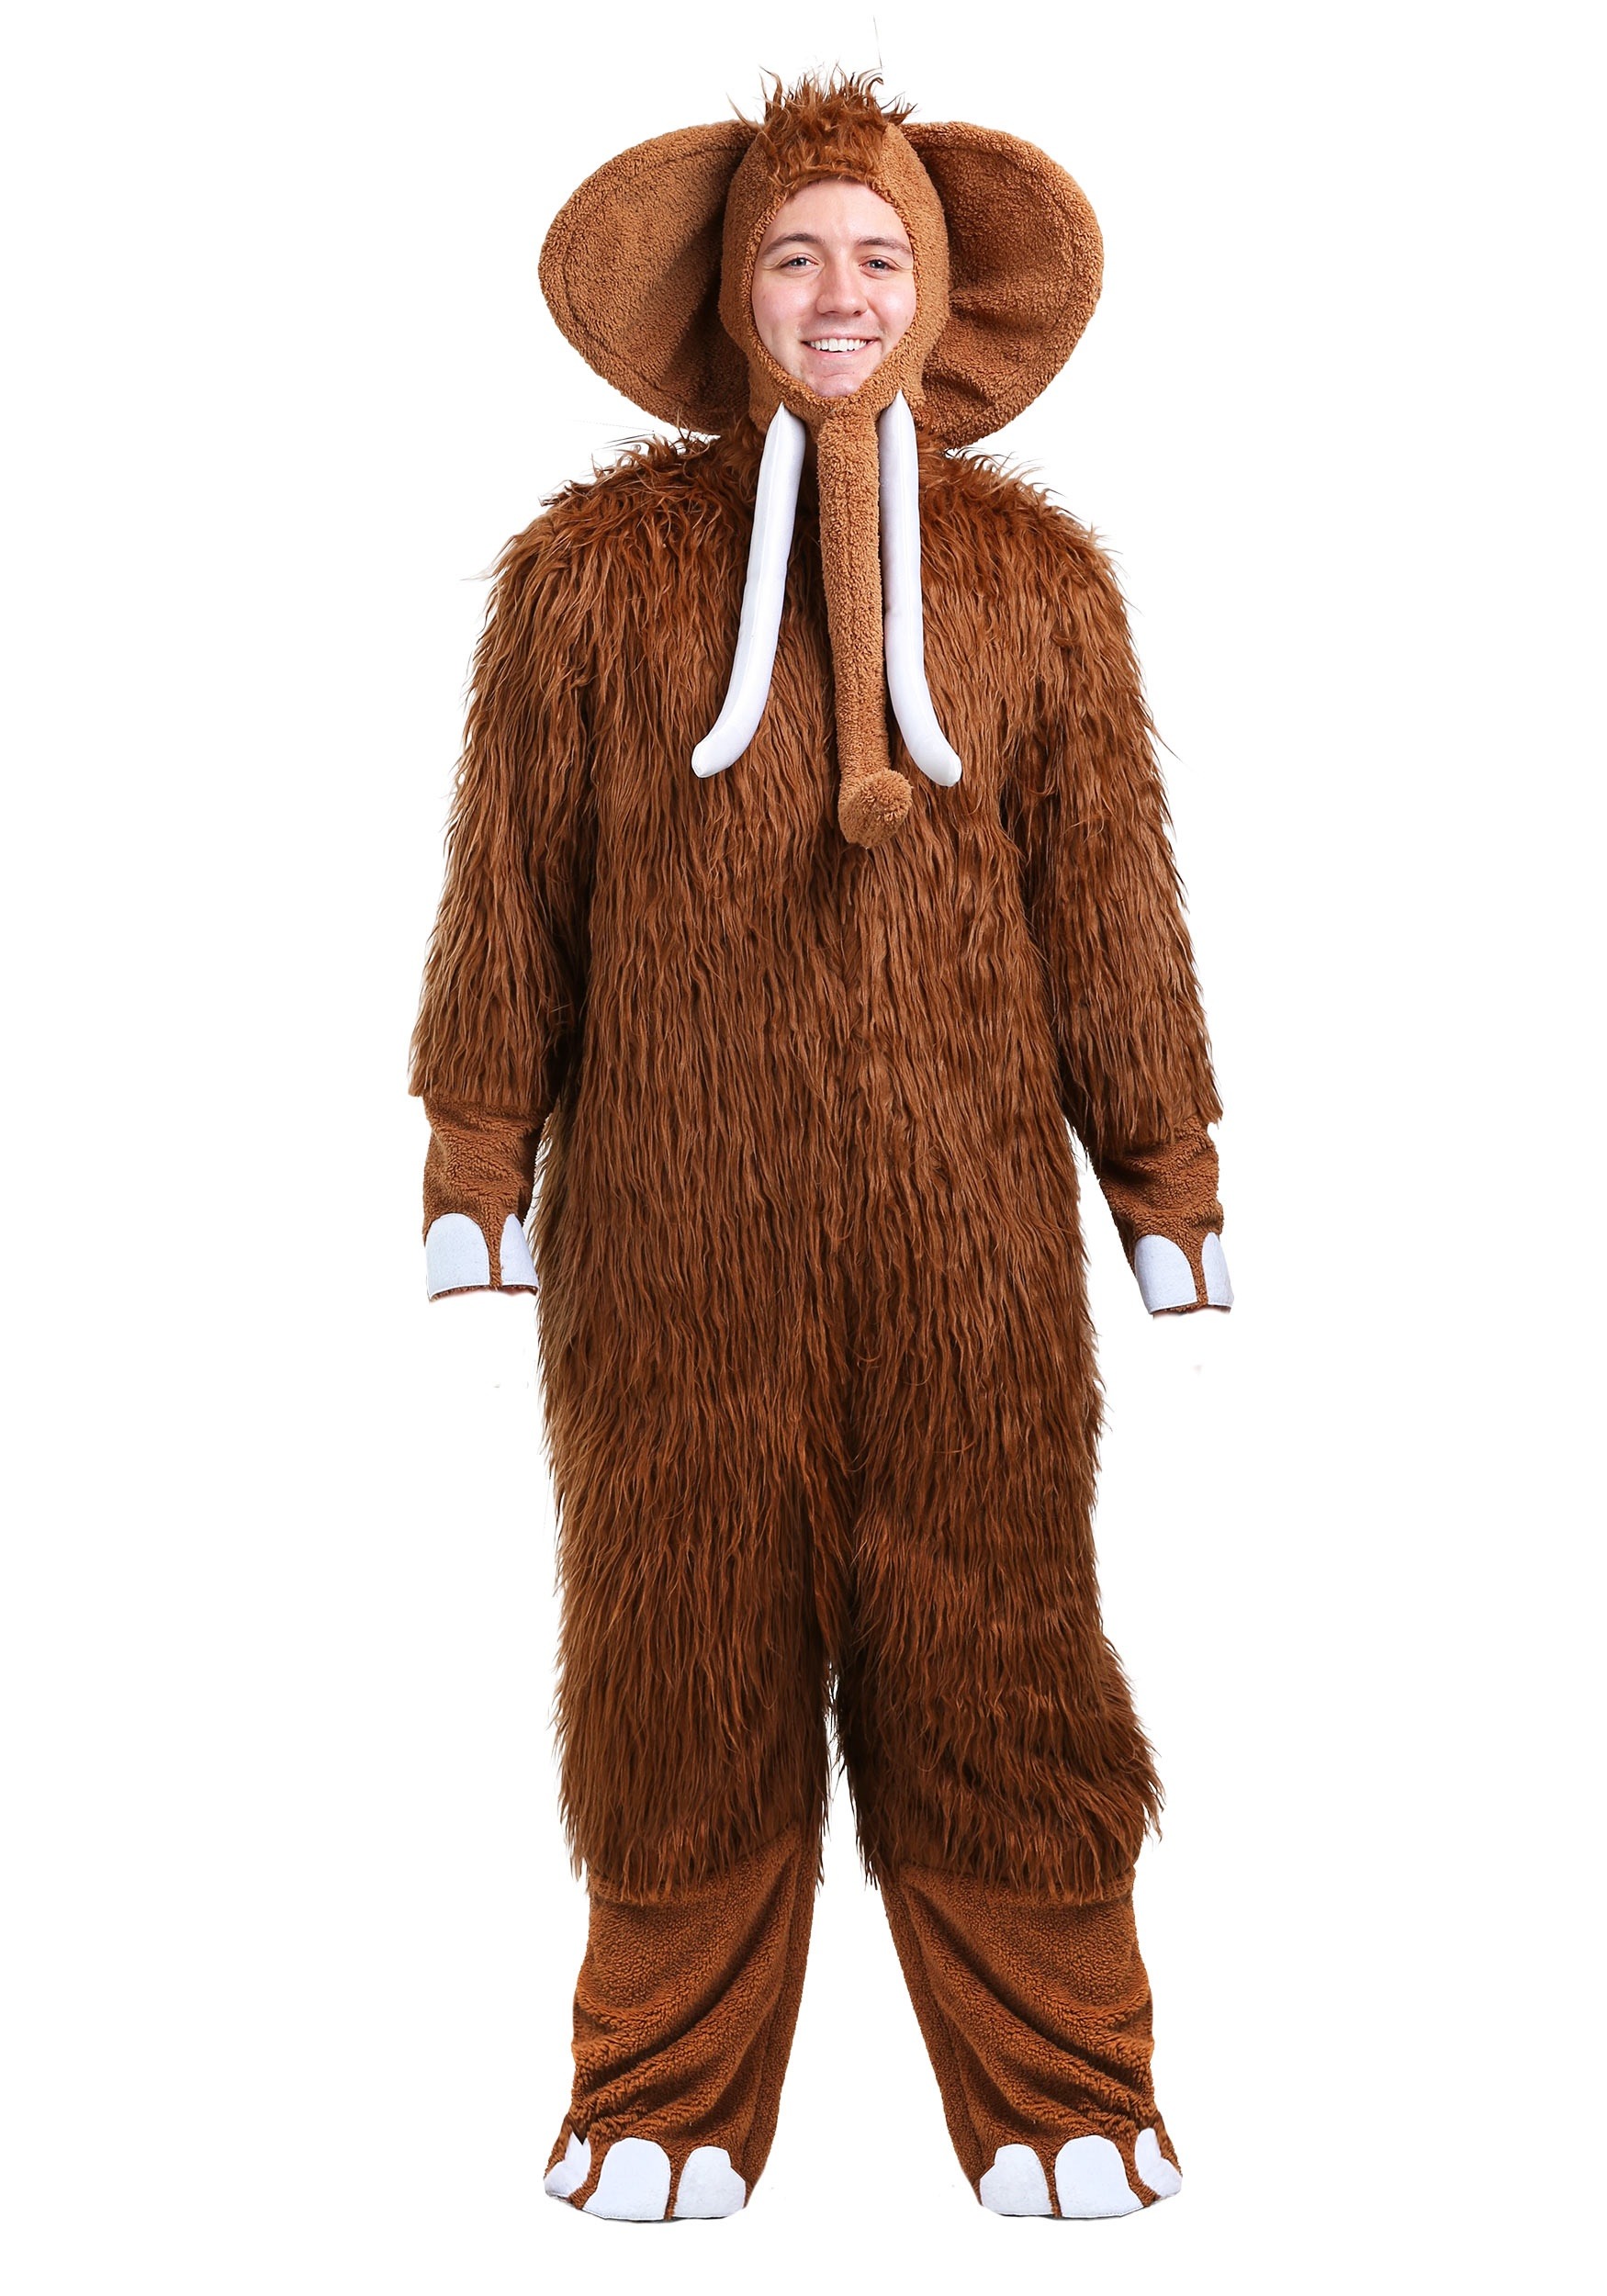 Photos - Fancy Dress FUN Costumes Woolly Mammoth Adult Costume Brown FUN2700AD